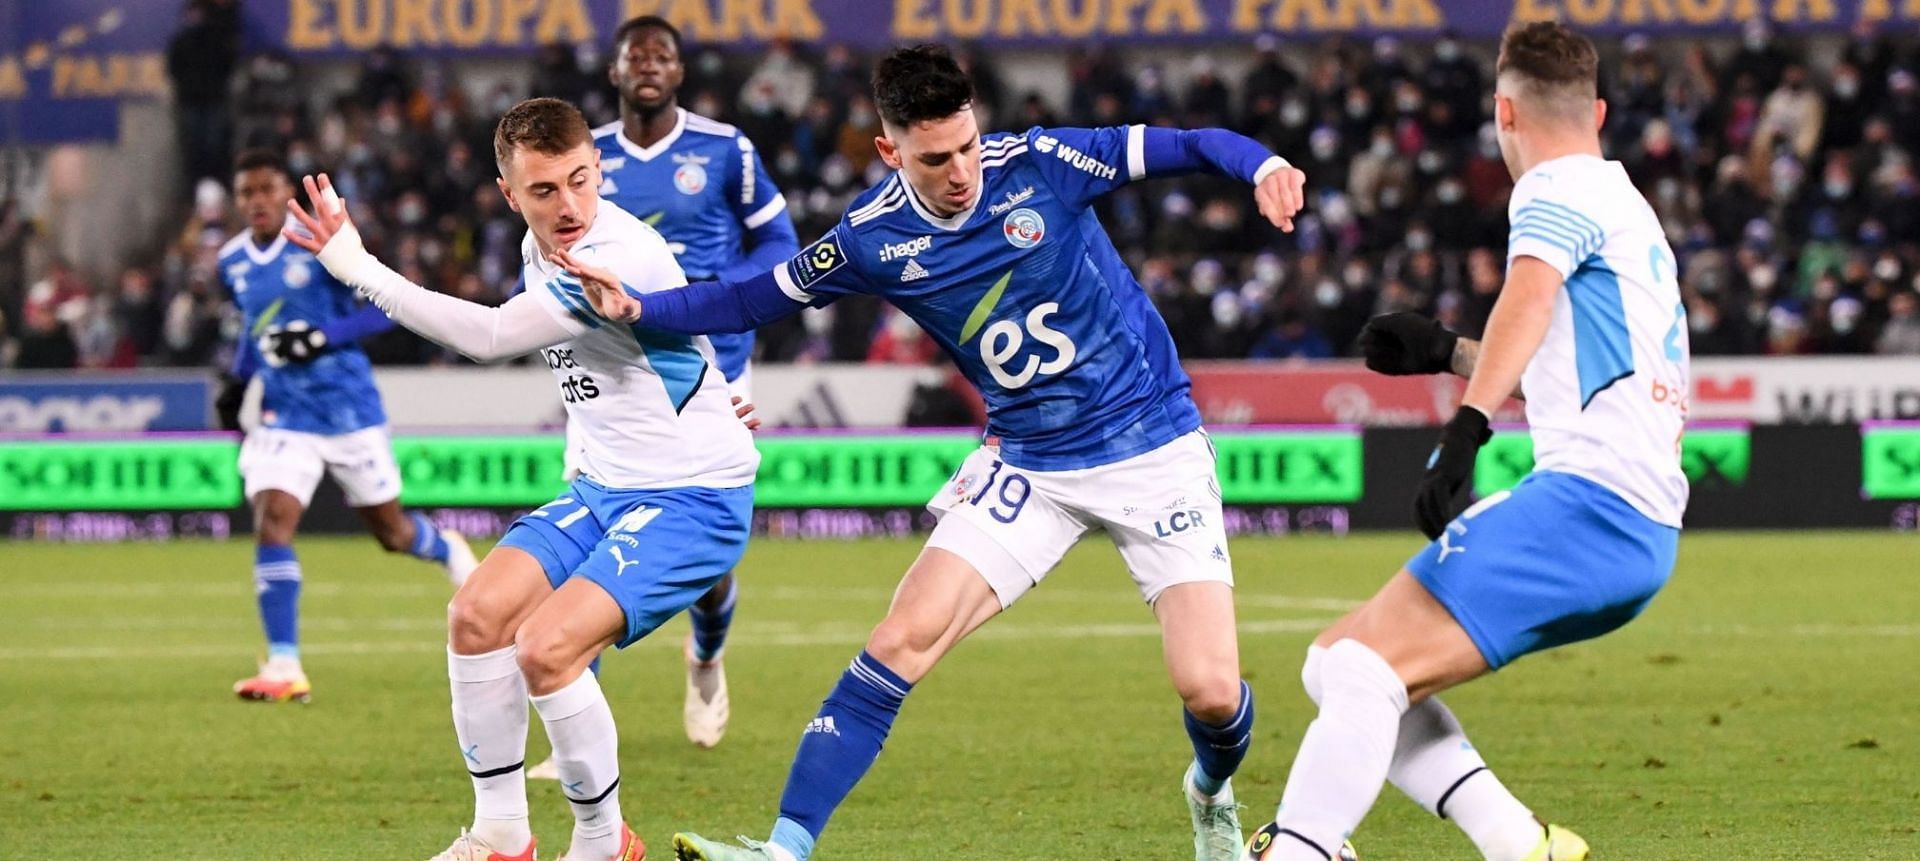 Marseille will lock horns against Strasbourg in their first Ligue 1 match of the year on Friday